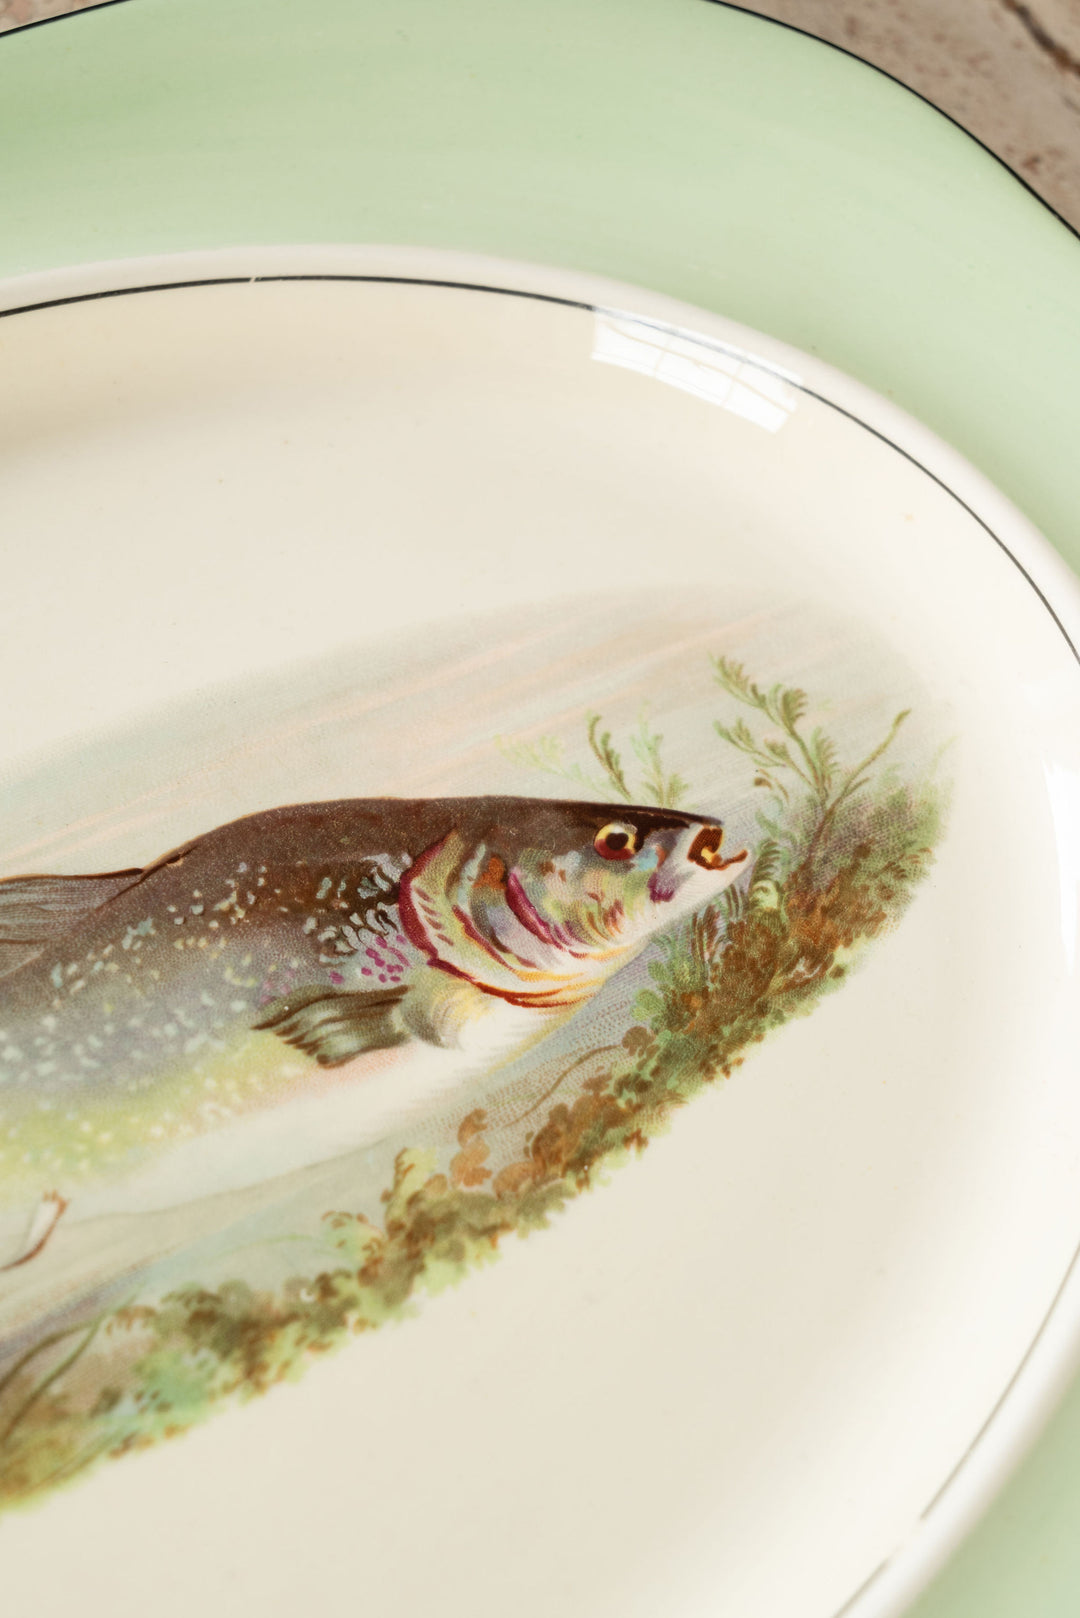 1930s wood's ivoryware fish plate service